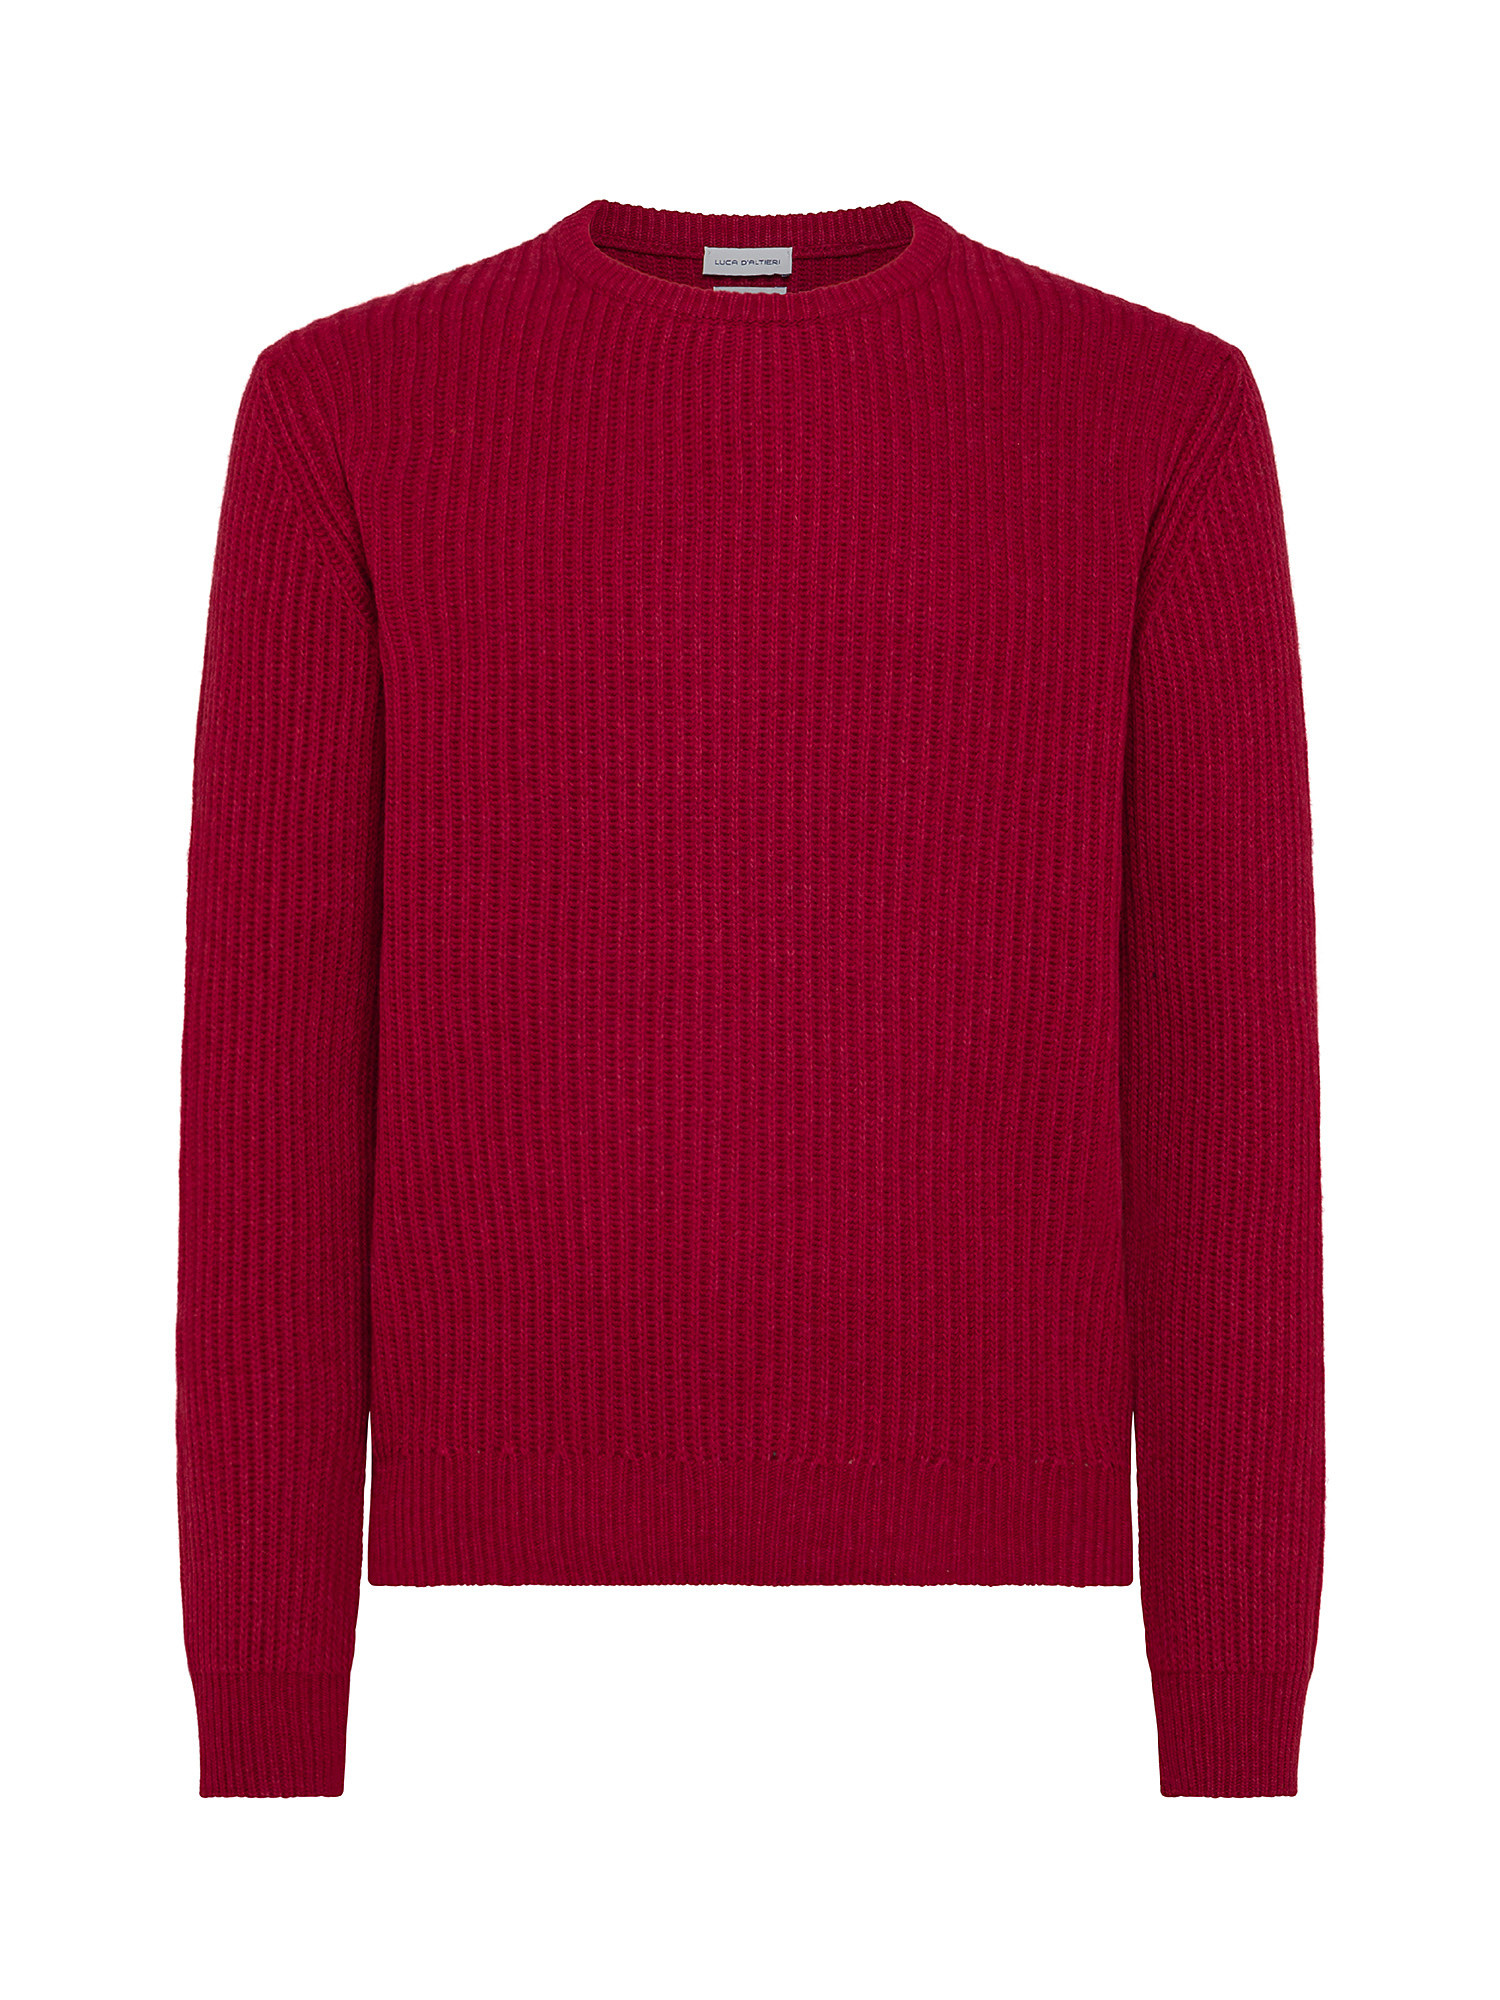 Crewneck sweater with noble fibers, Red, large image number 0